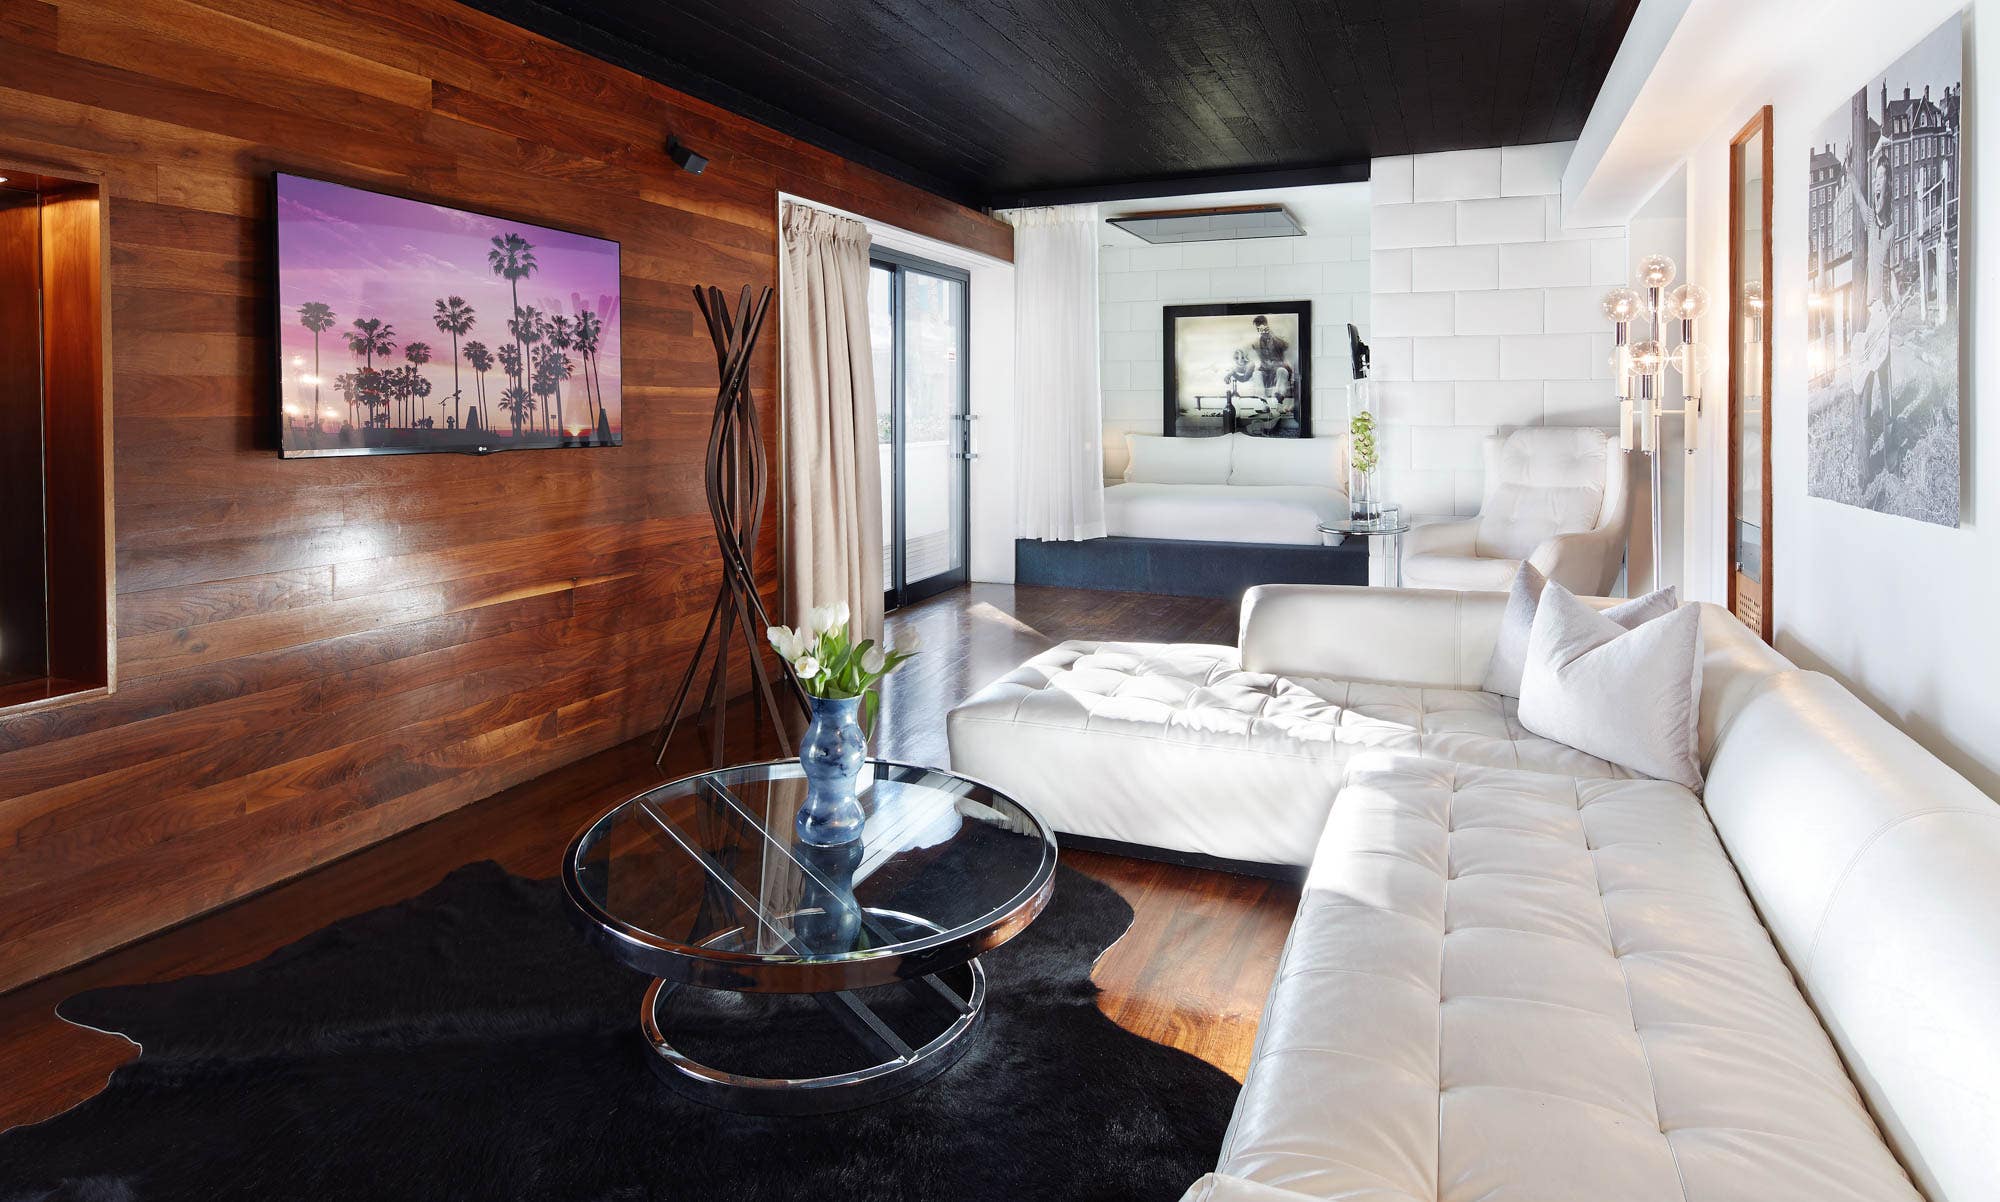 Interior photo of the Hollywood Roosevelt's Marilyn Monroe Suite with wood walls and white couch